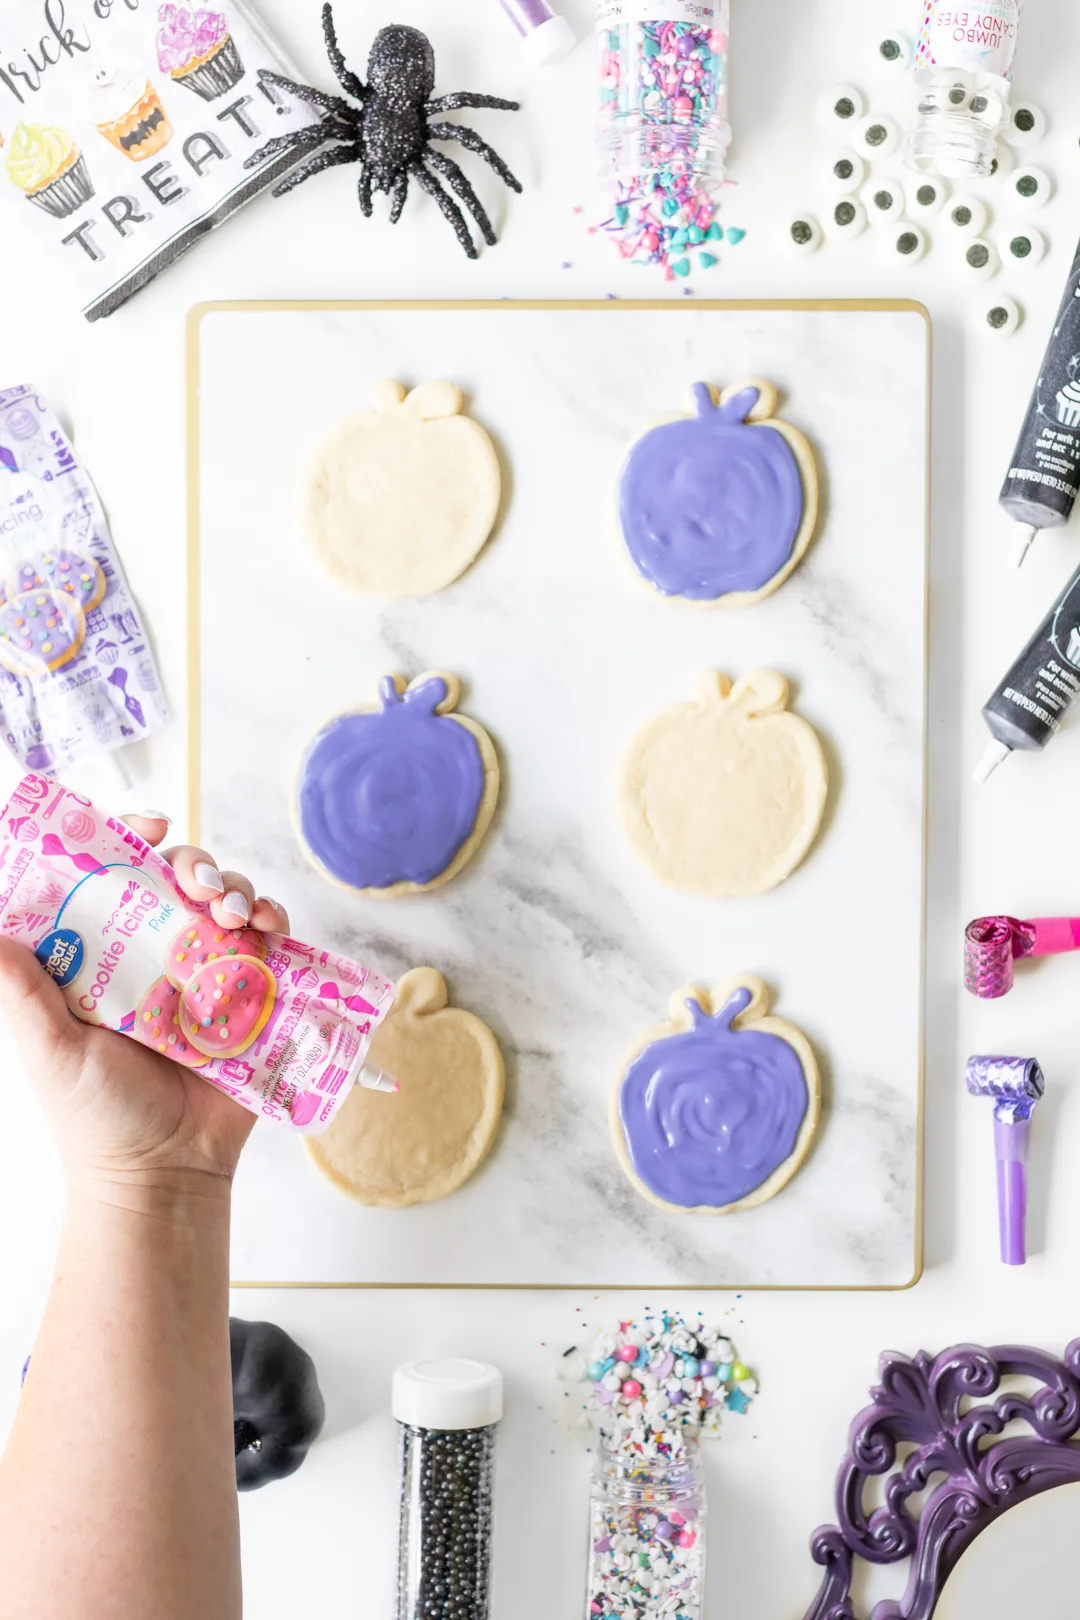 Adding cookie icing to sugar cookies